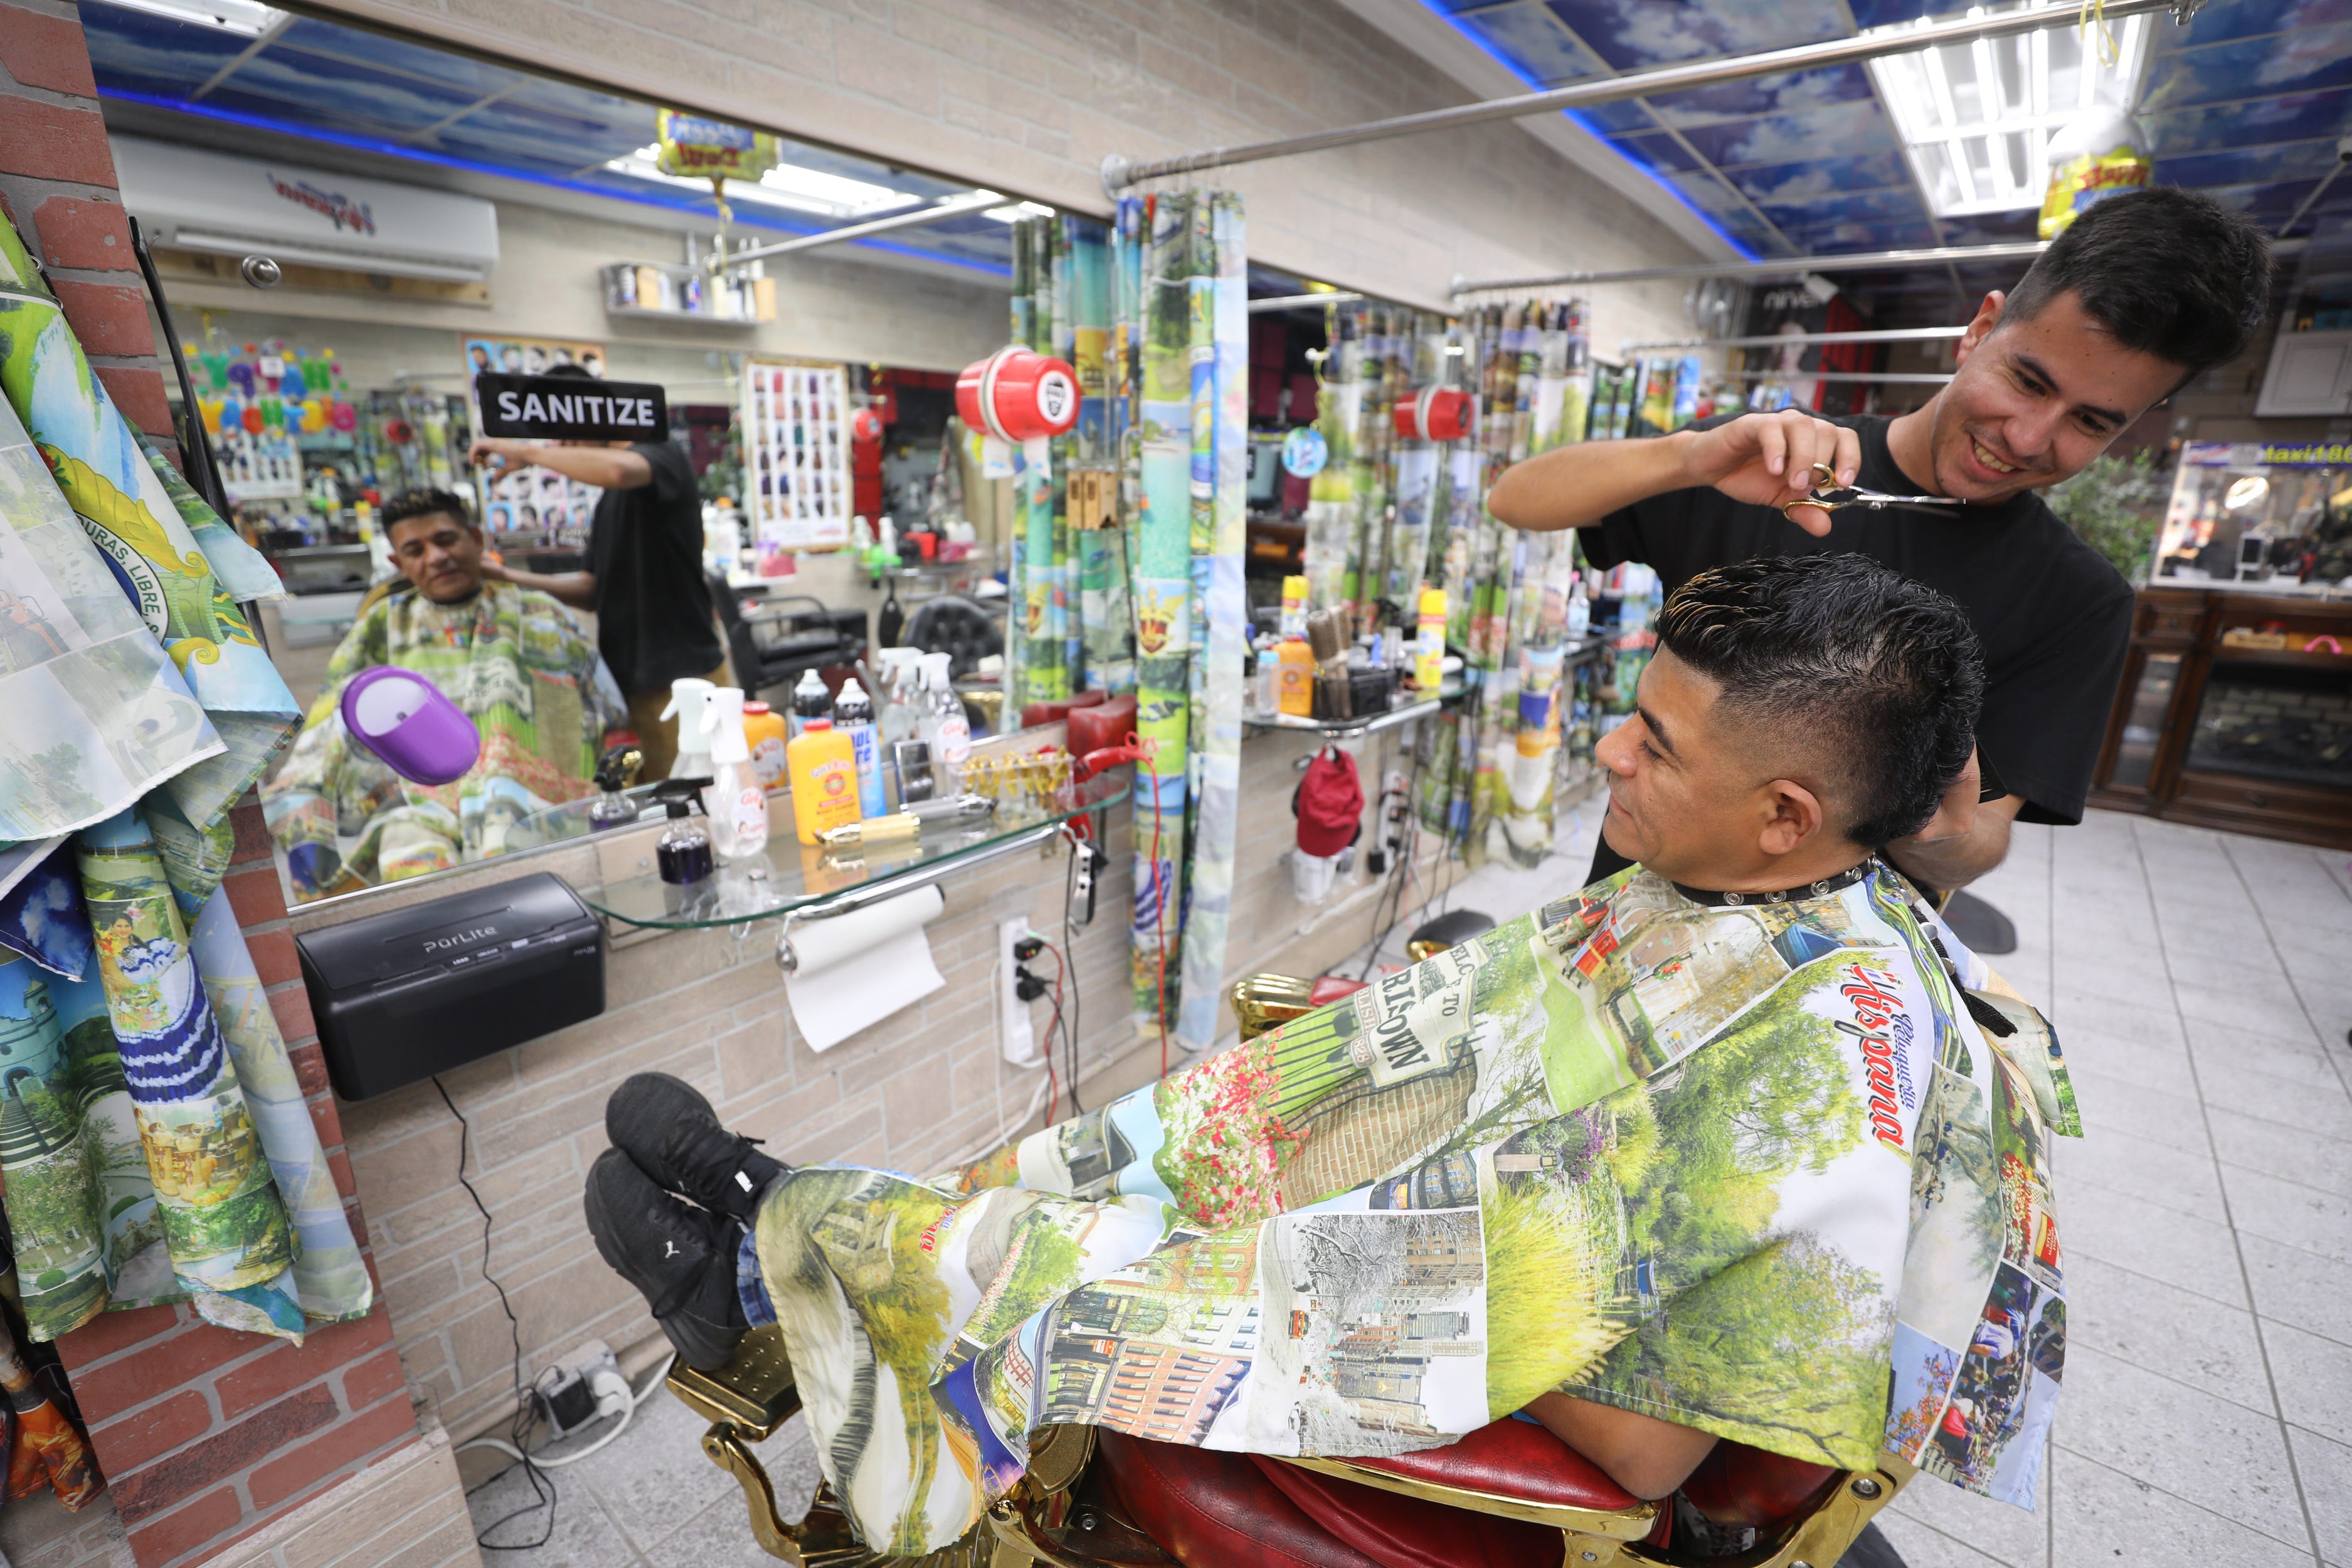 A person cycles past La Peluqueria Barber Shop on Speedwell Avenue on October 14, 2021. Inside the shop, owner Wilmer Valbuena has his hair cut by Cristian Castilla, of Morristown.